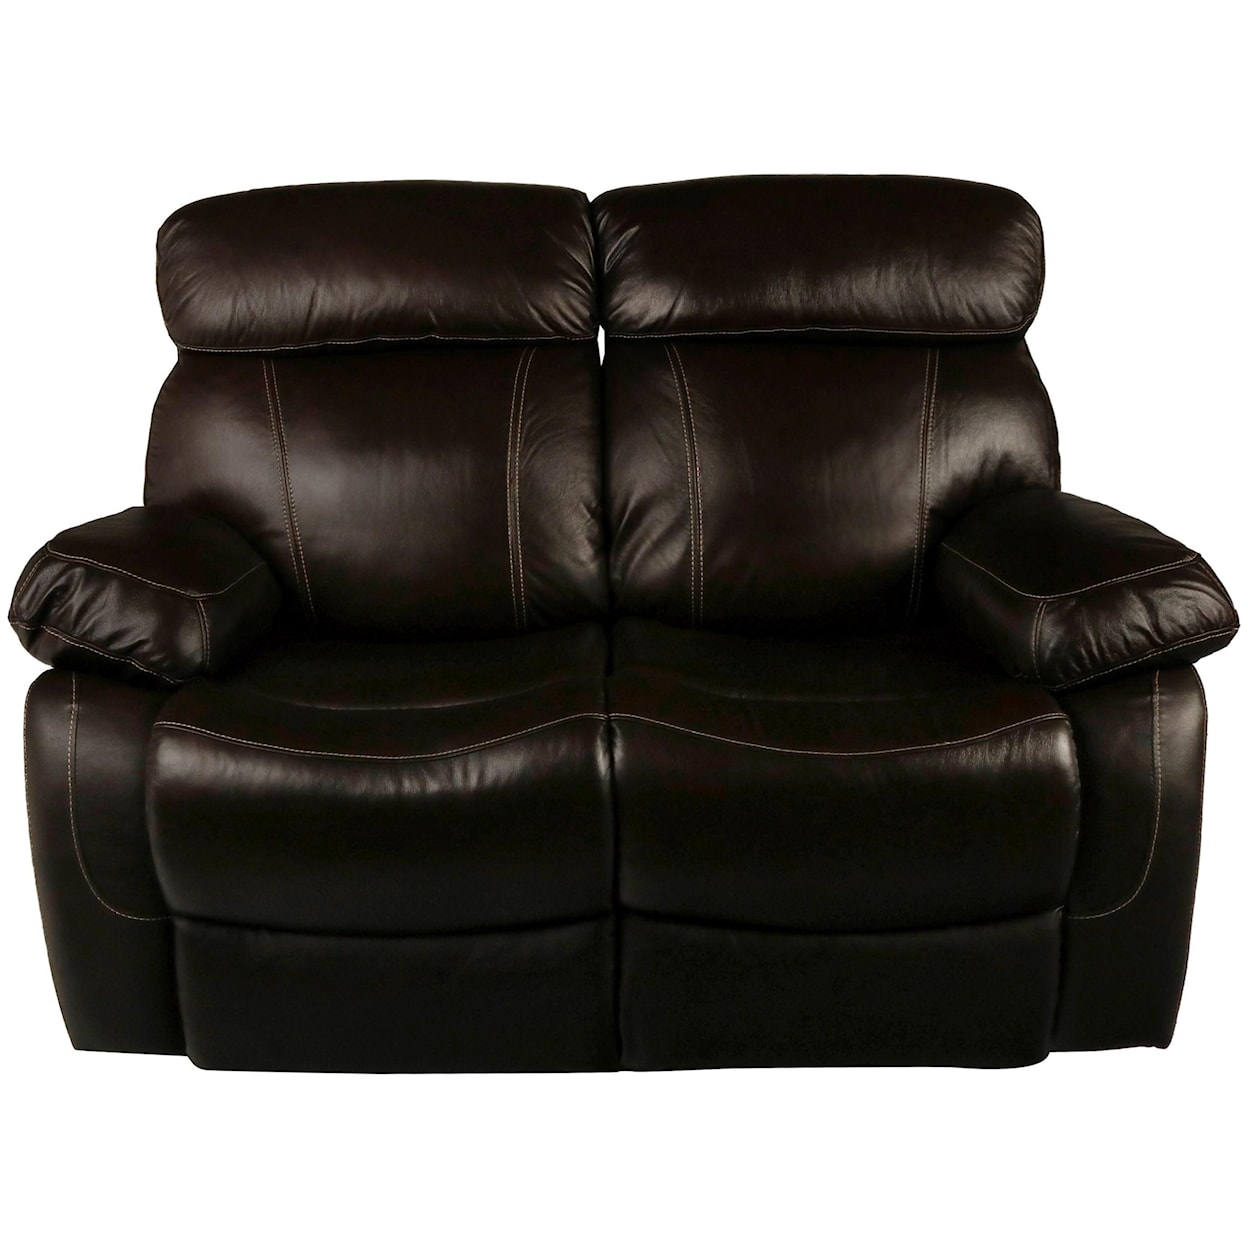 New Classic Dante Leather Power Reclining Loveseat